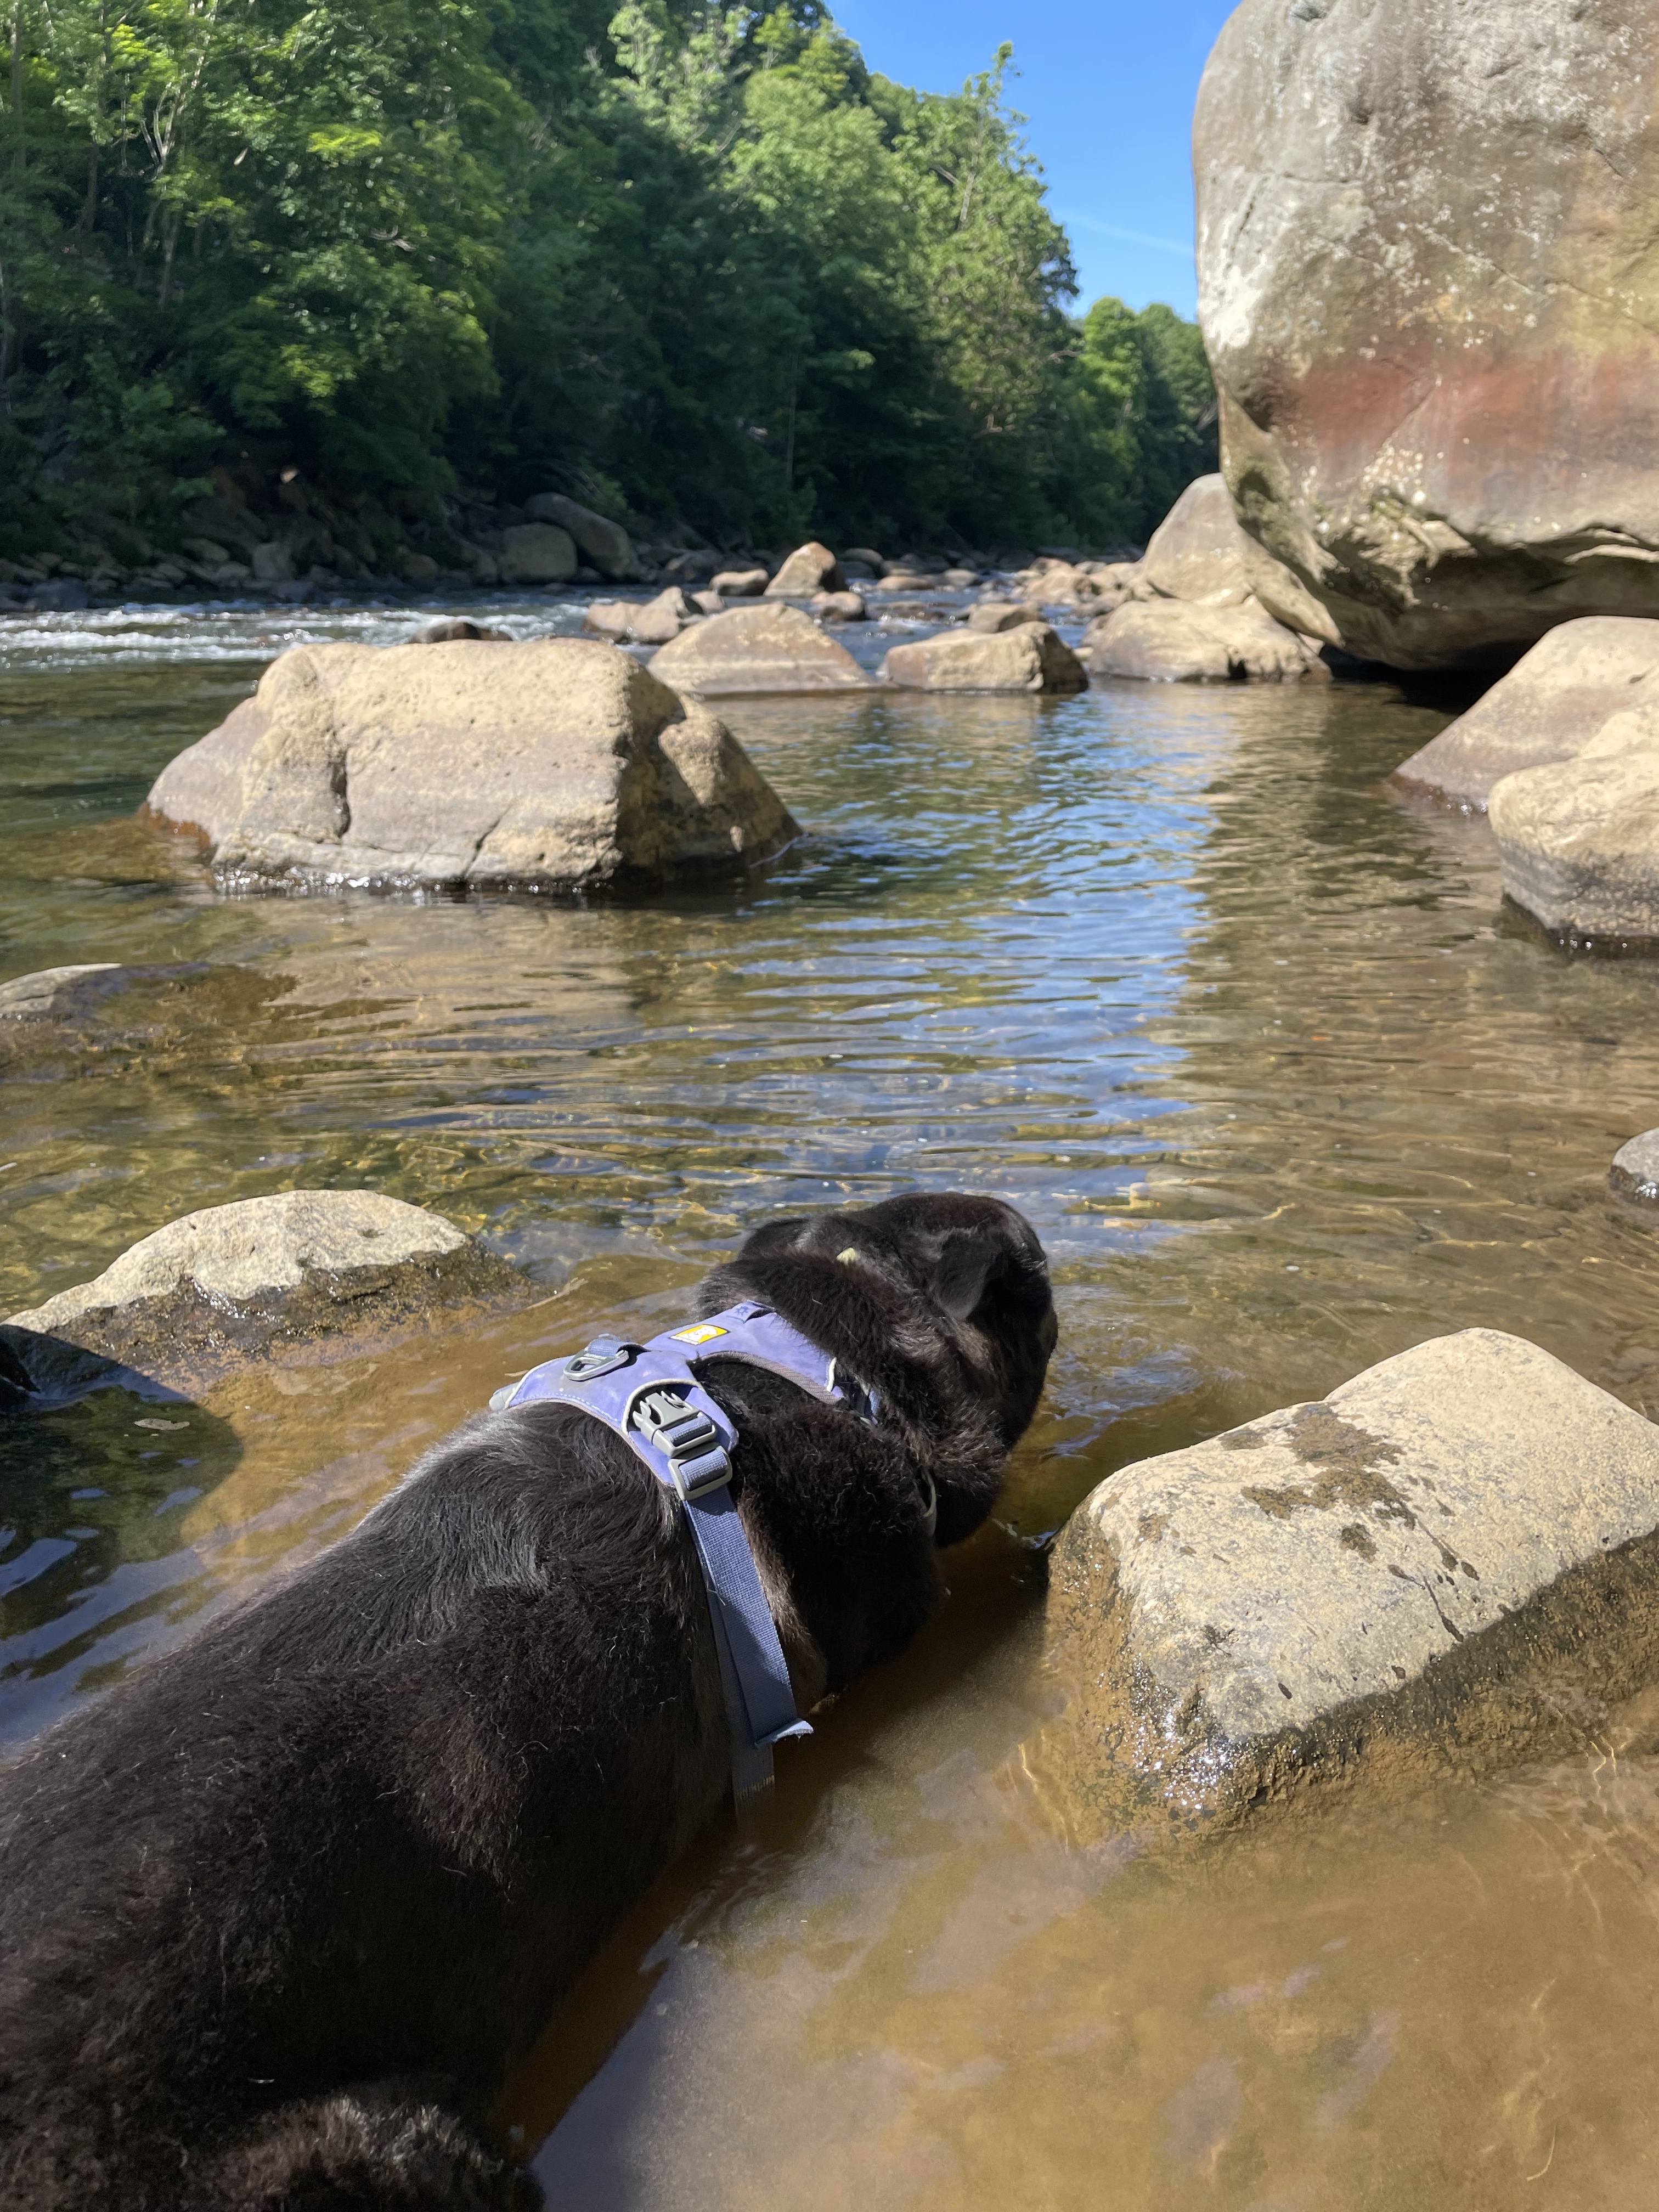 Black dog lying in a river with boulders